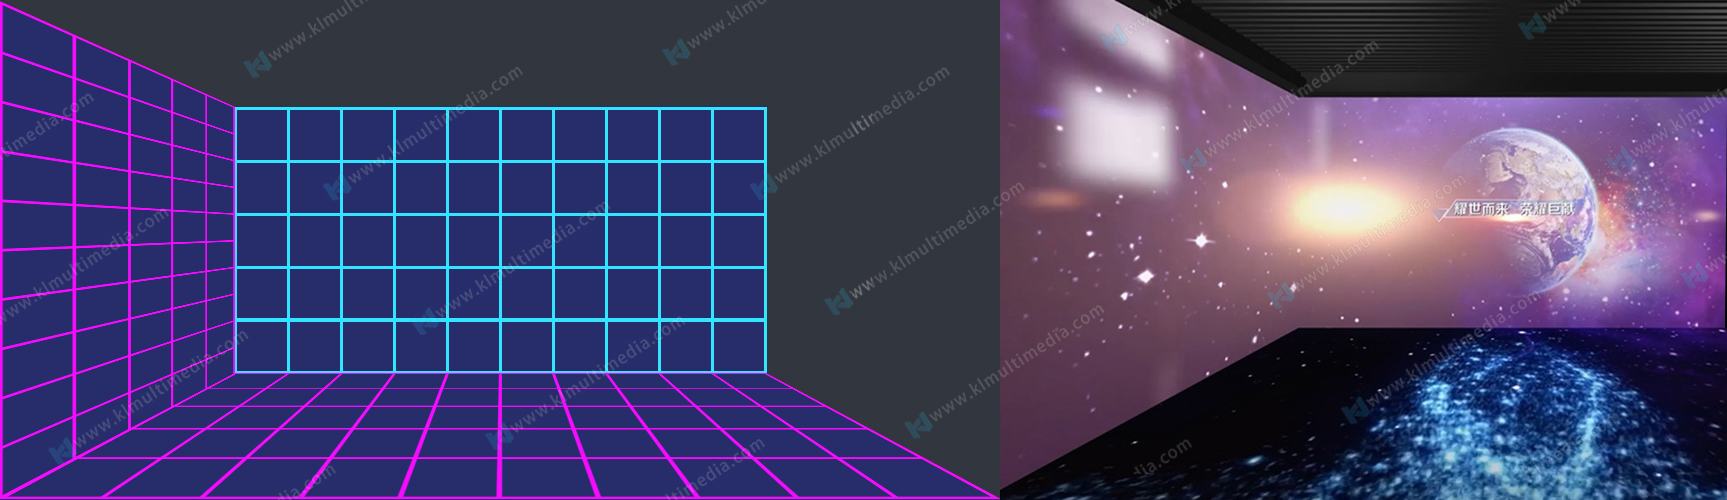 Projection mapping software schemes4